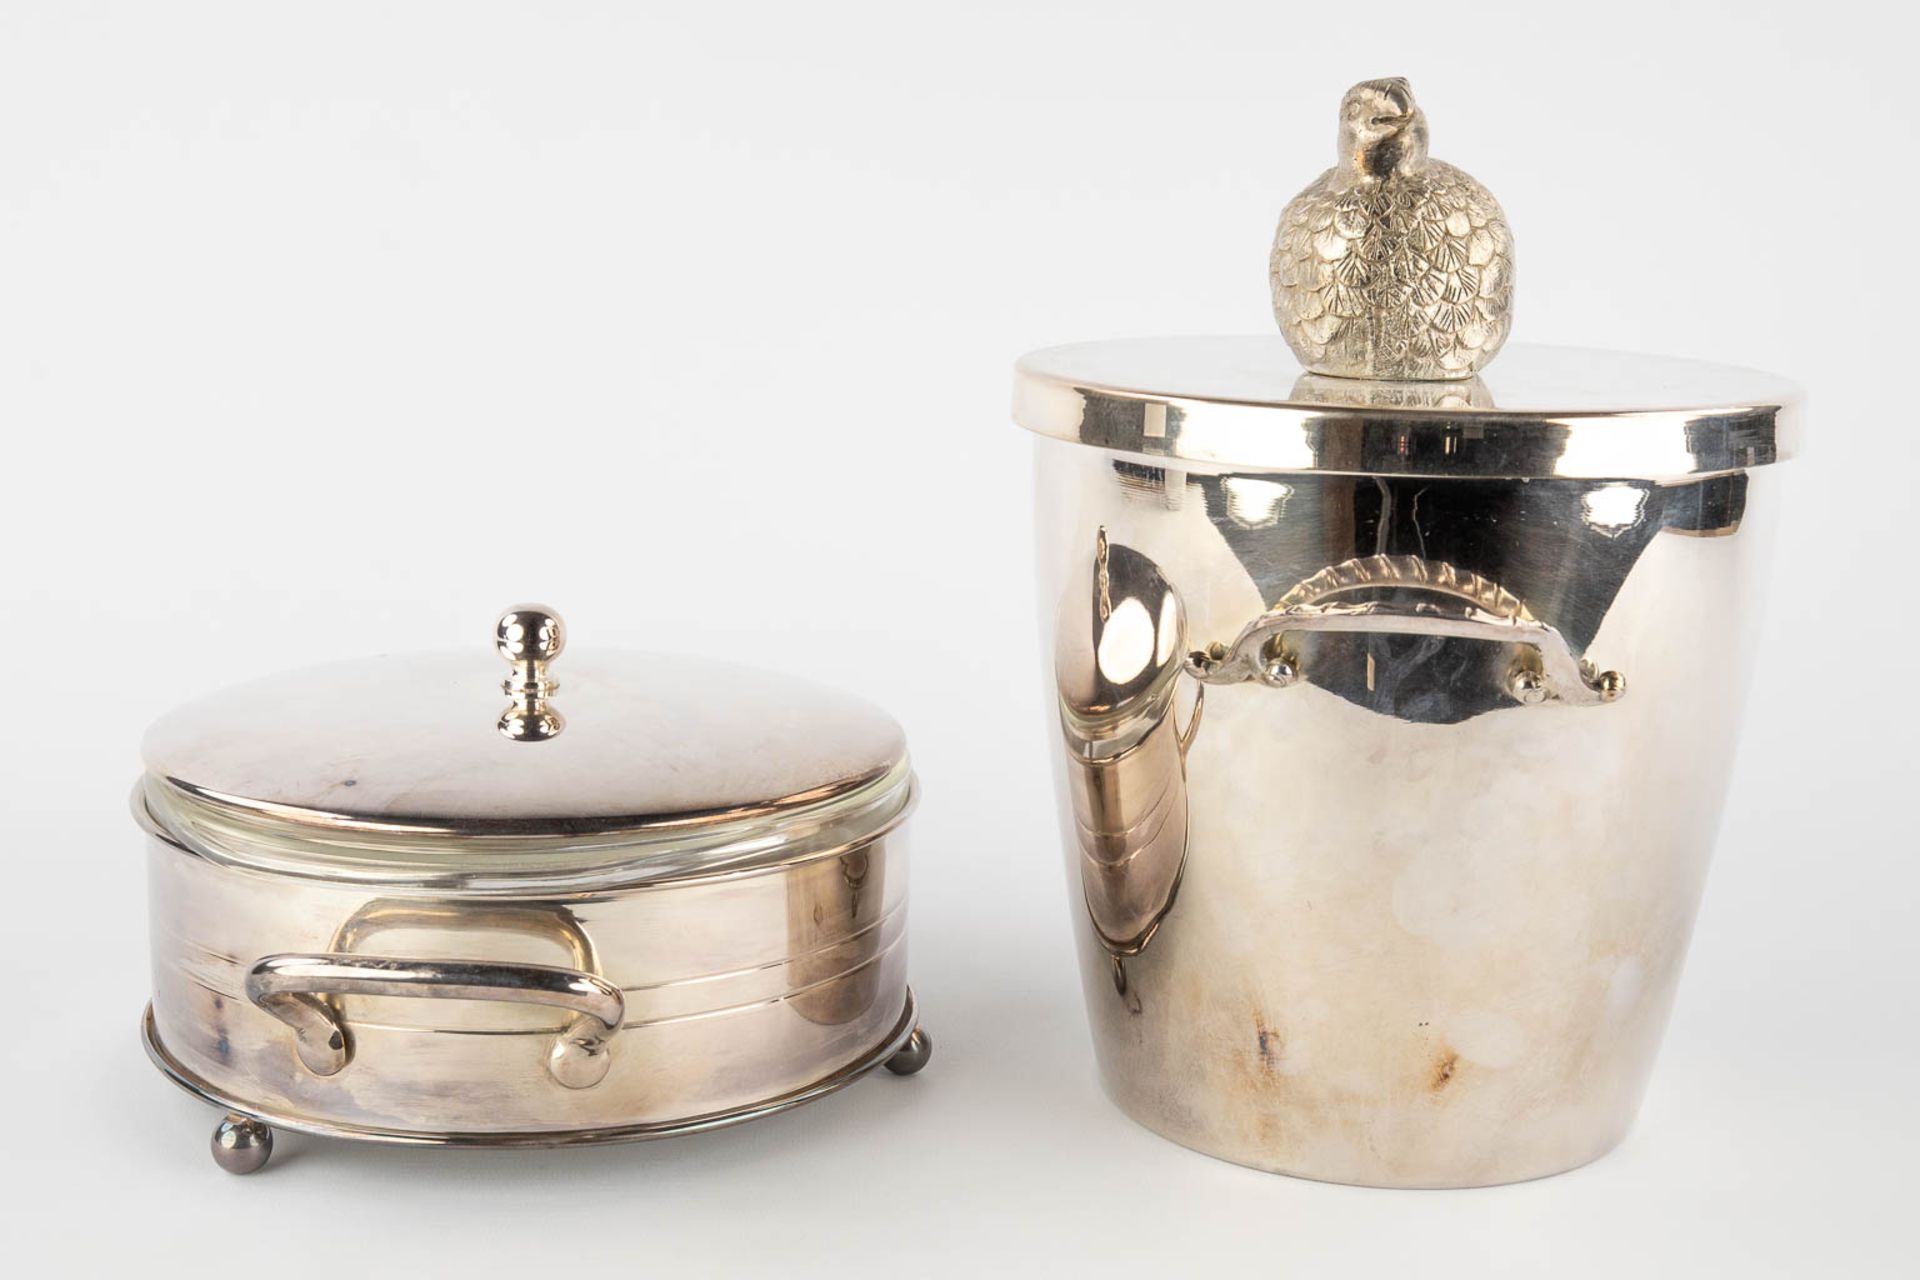 Four silver-plated storage boxes, ice-pails. (H:27 x D:20 cm) - Image 6 of 20